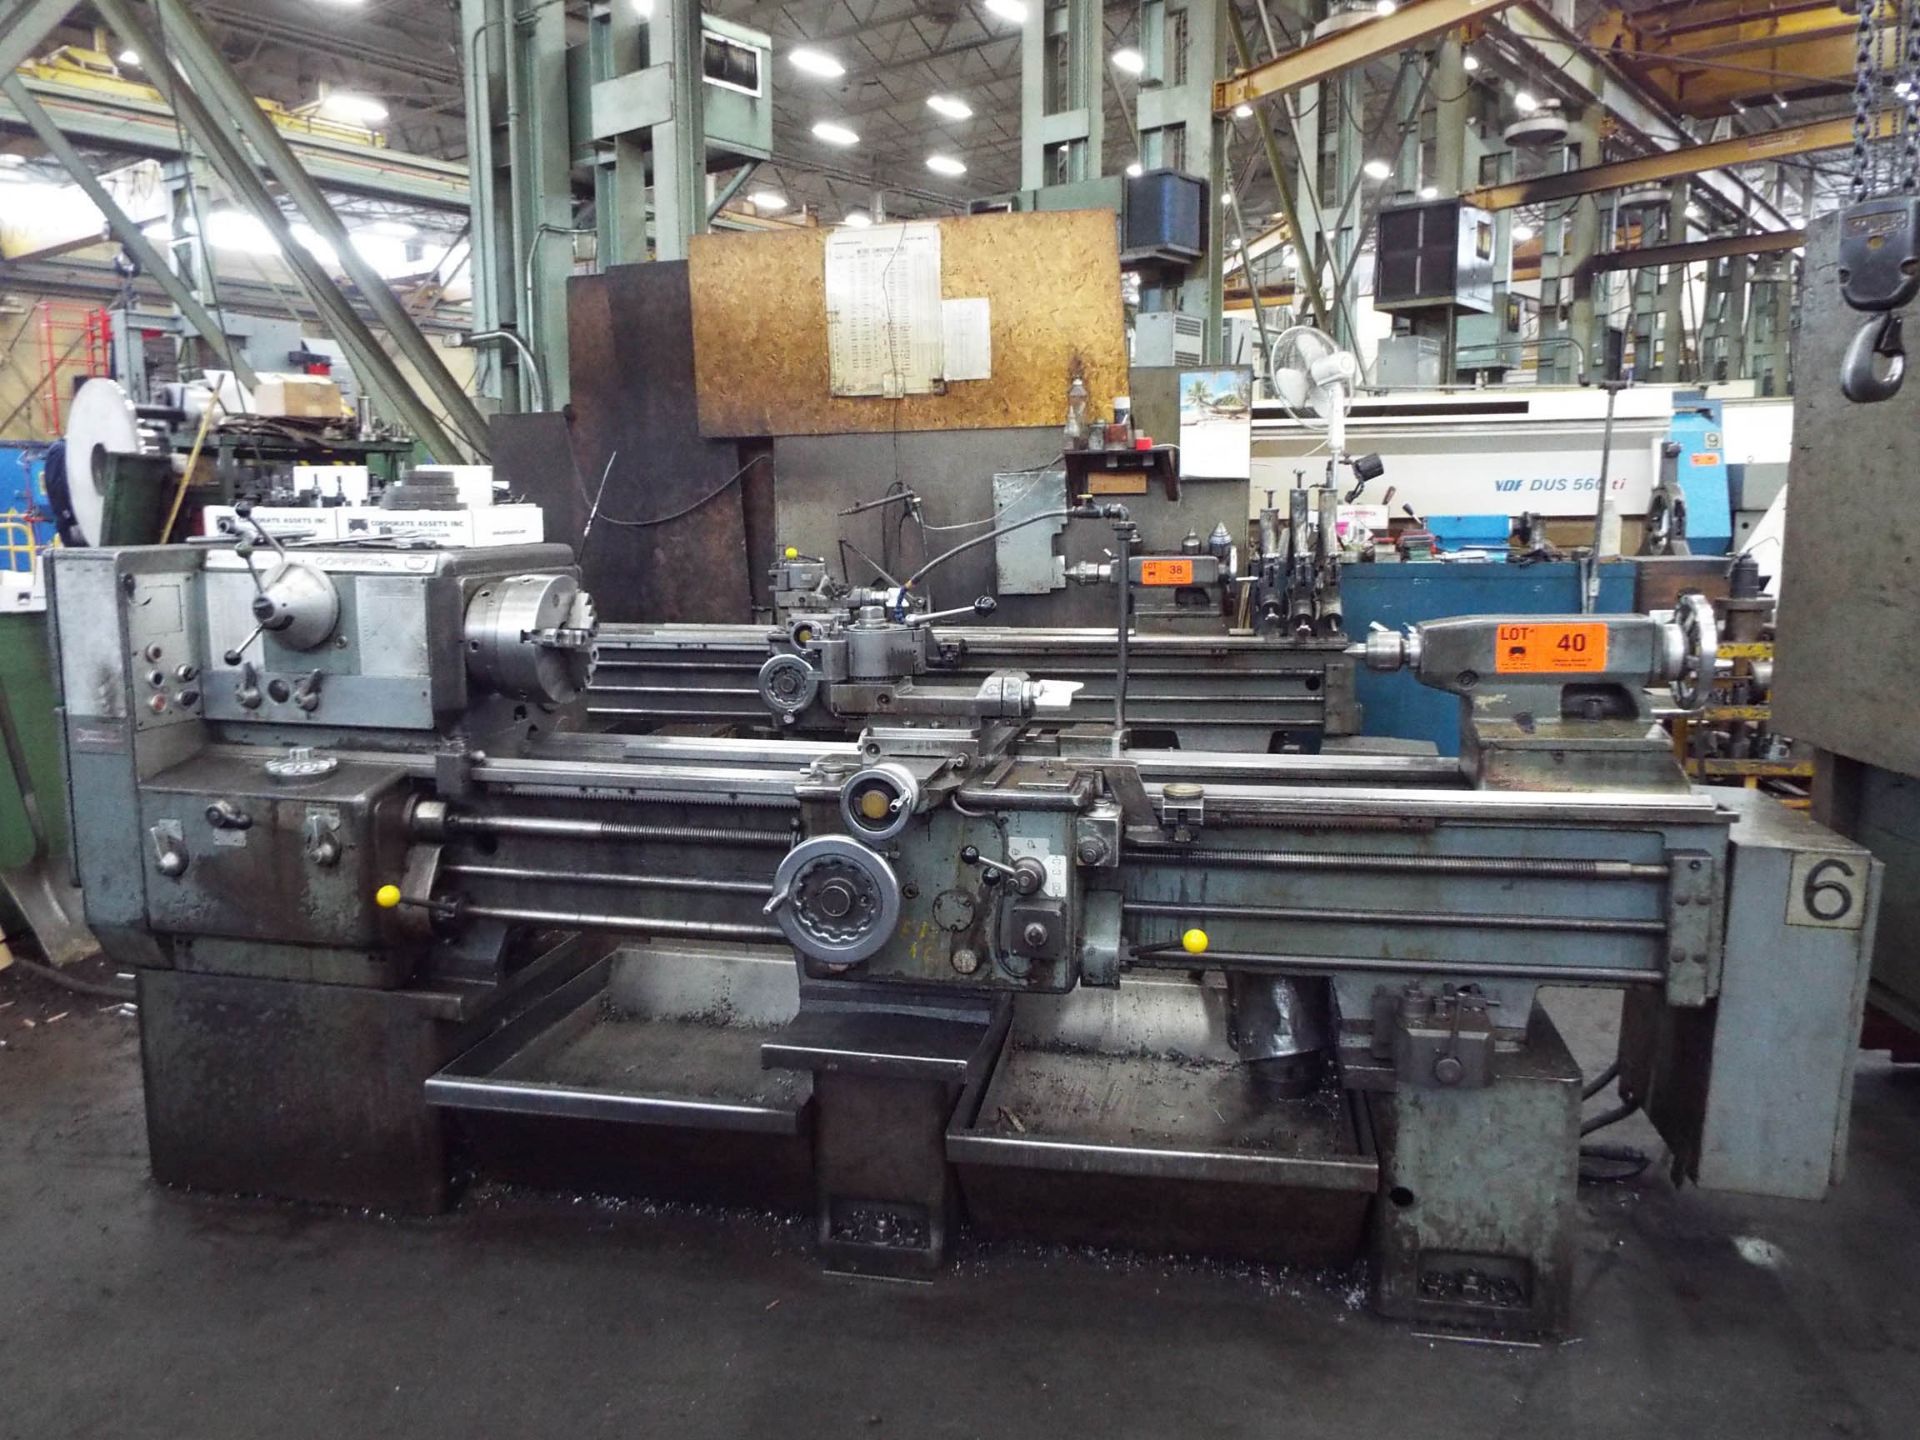 BOEHRINGER GOPPINGEN VDF LATHE WITH 21" SWING OVER BED, 64" DISTANCE BETWEEN CENTERS, 2.5" SPINDLE - Image 2 of 9